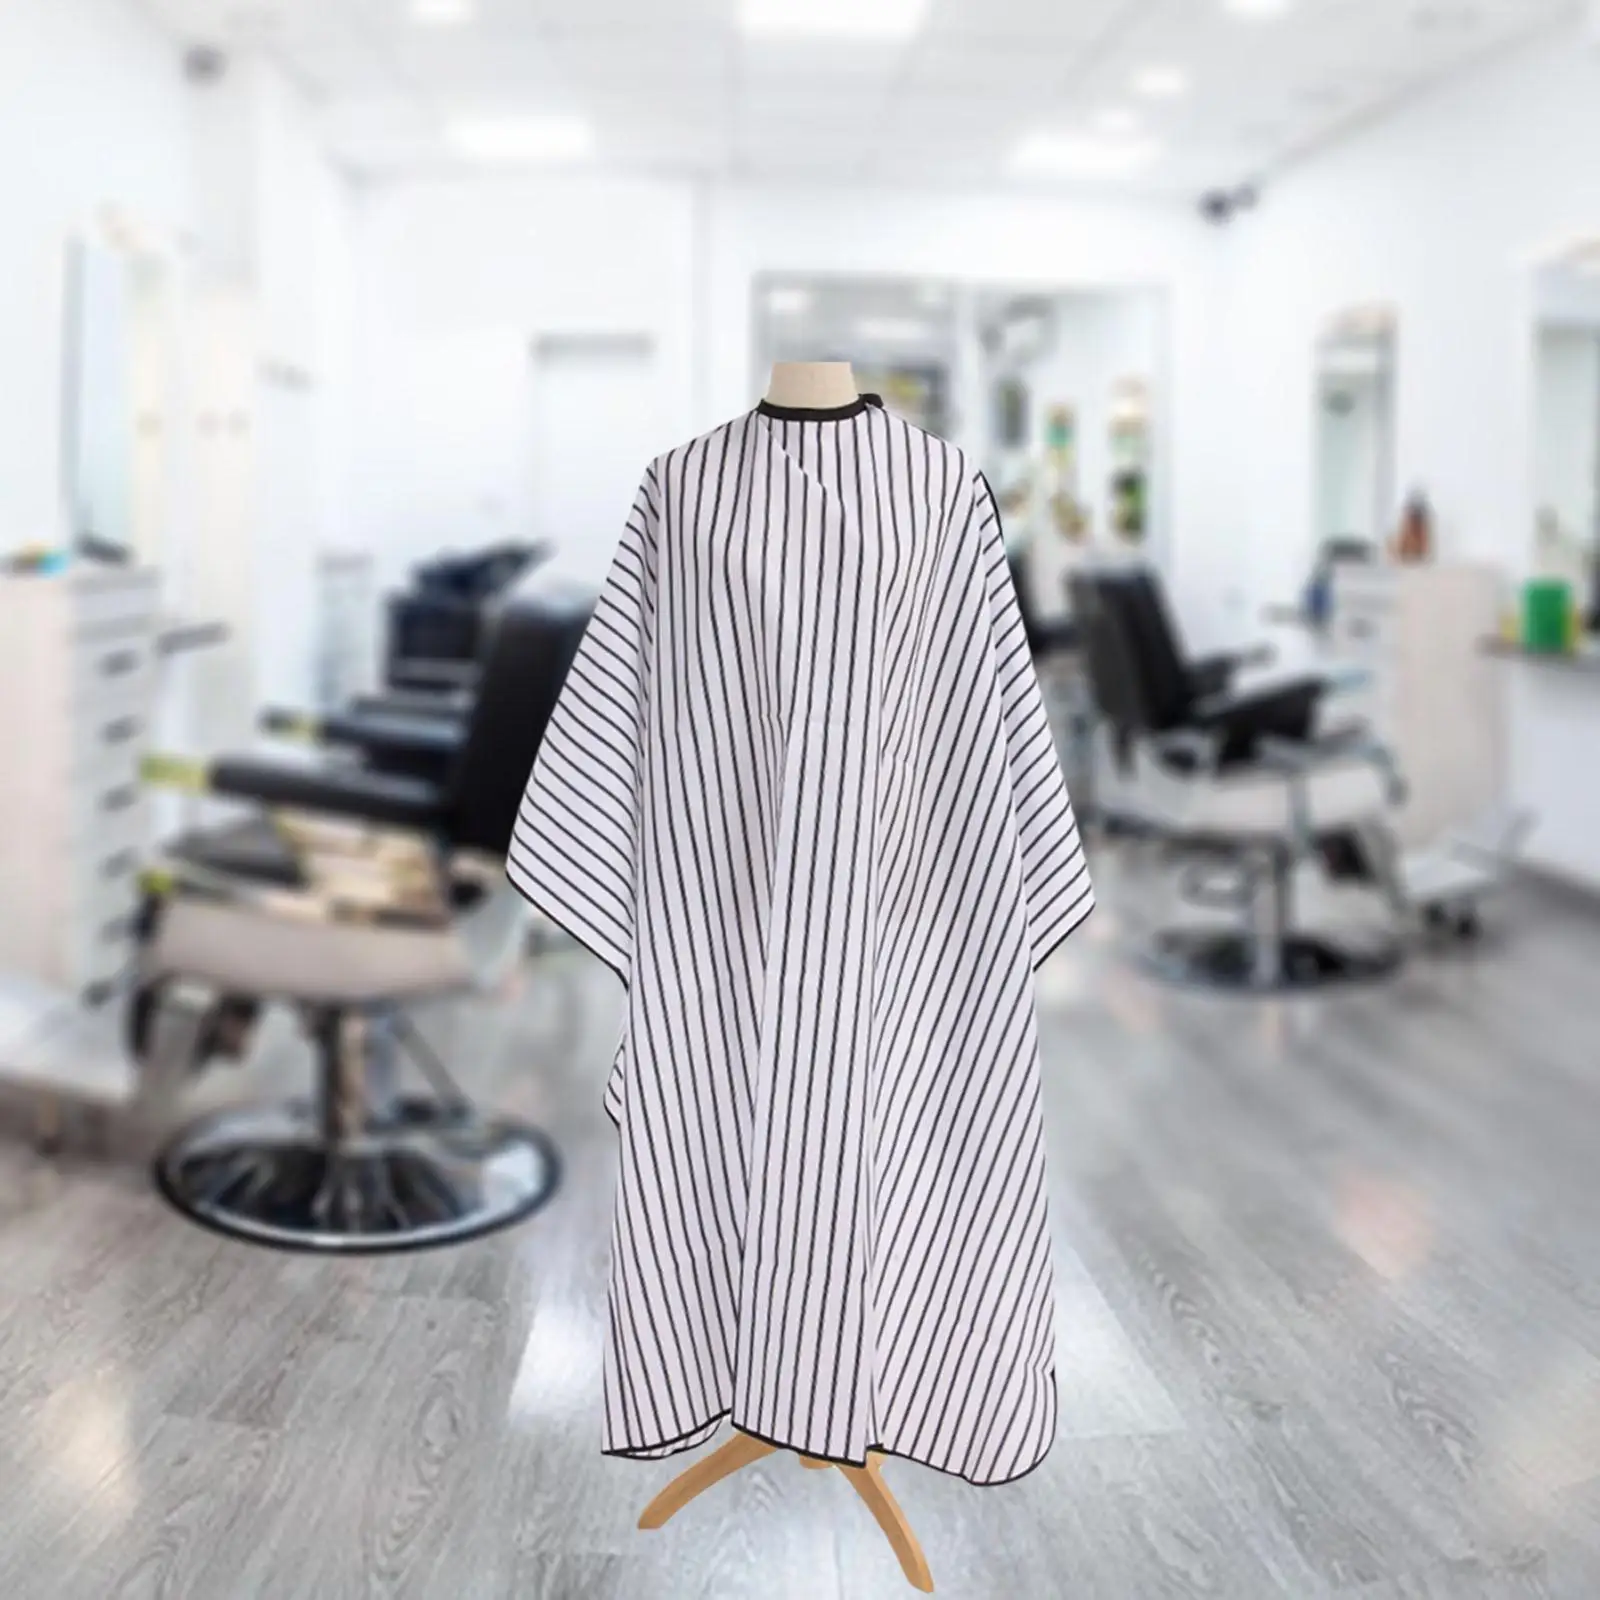 Hair Cutting Cape 60x140cm Waterproof with Snap Large Cloth Accessories for Hairstylist Barber Hairdressing Gown Salon Adults